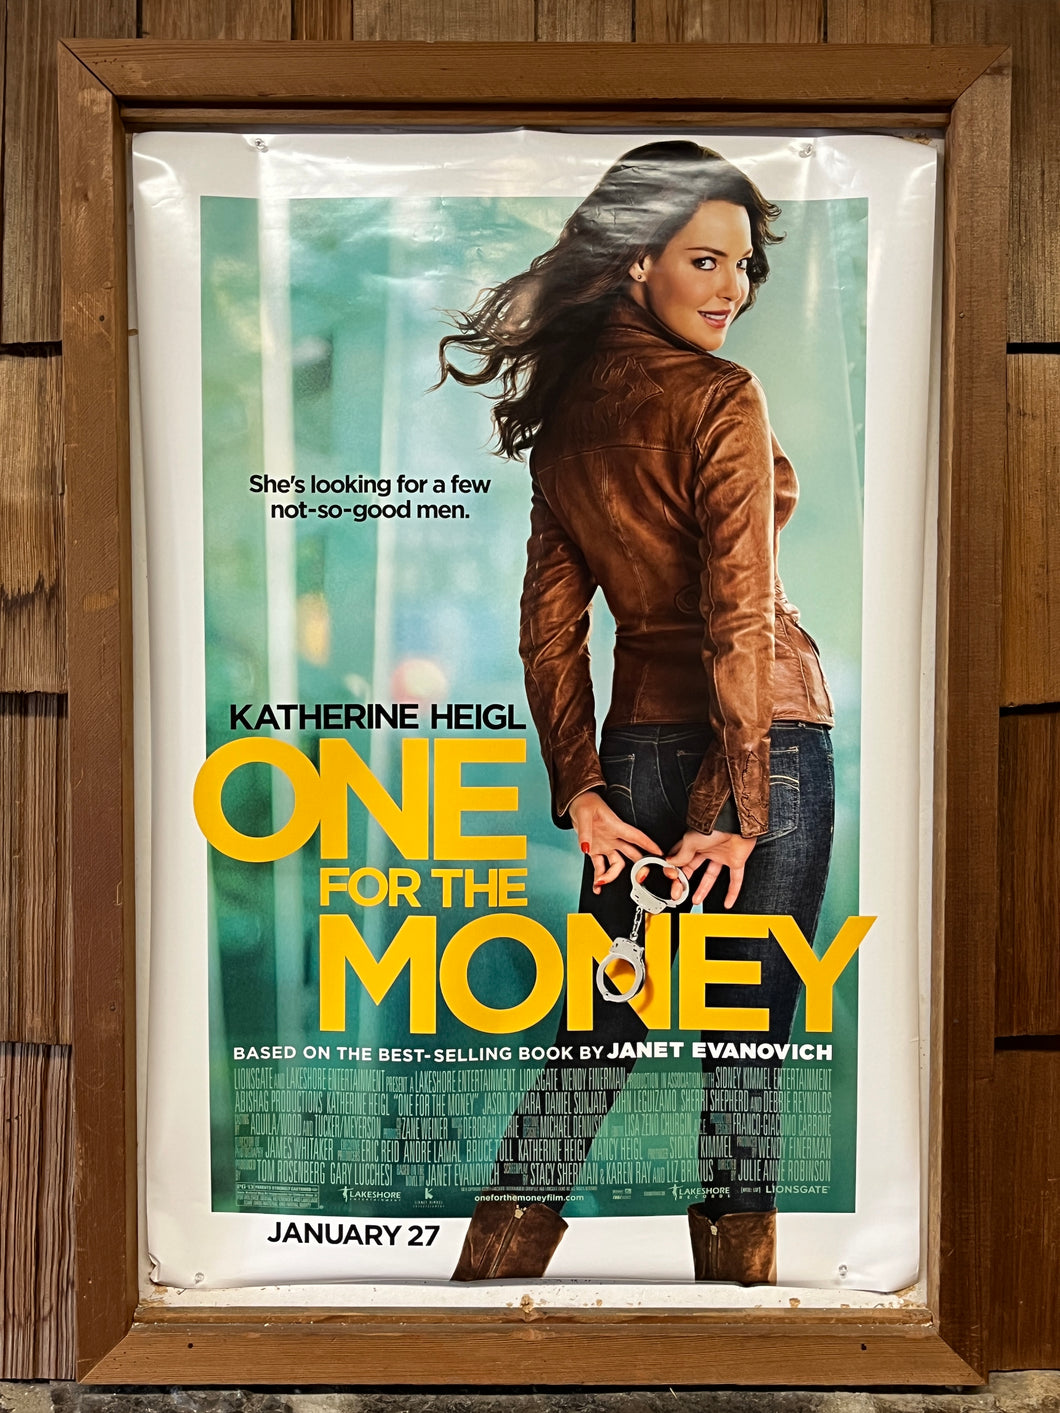 One for the Money (2012)